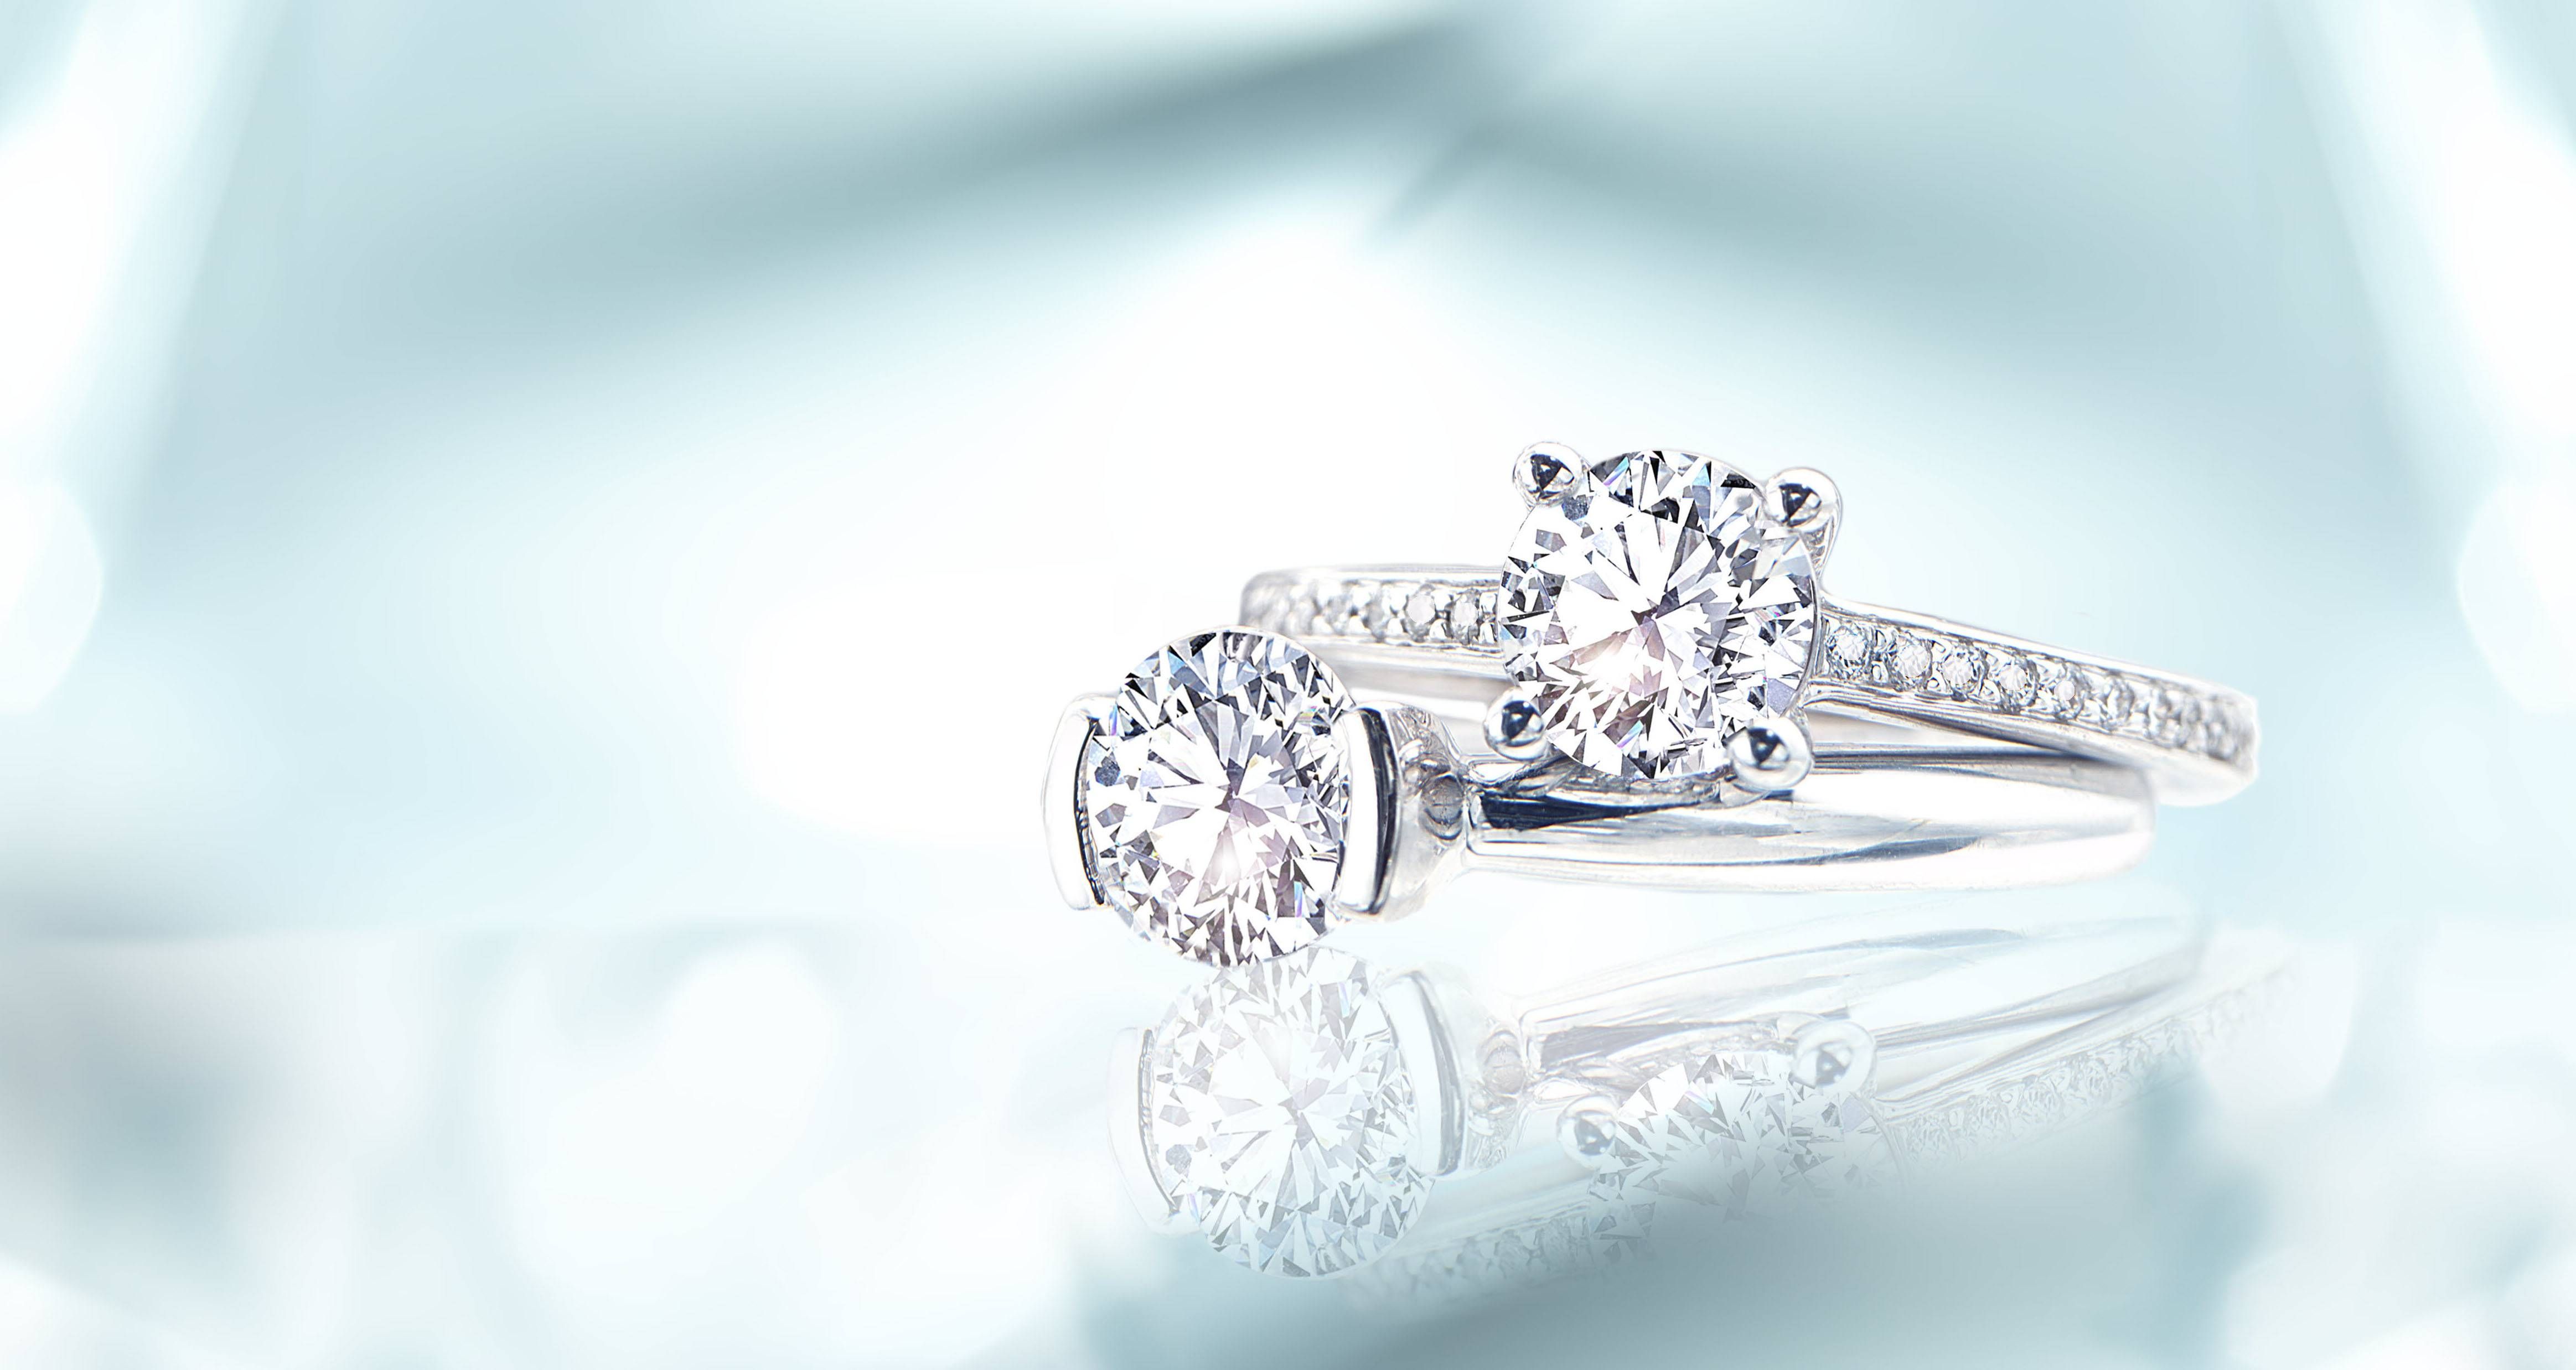 Modern Engagement Rings For Today's Woman | Ritani Pertaining To Modern Diamond Wedding Rings (View 12 of 15)